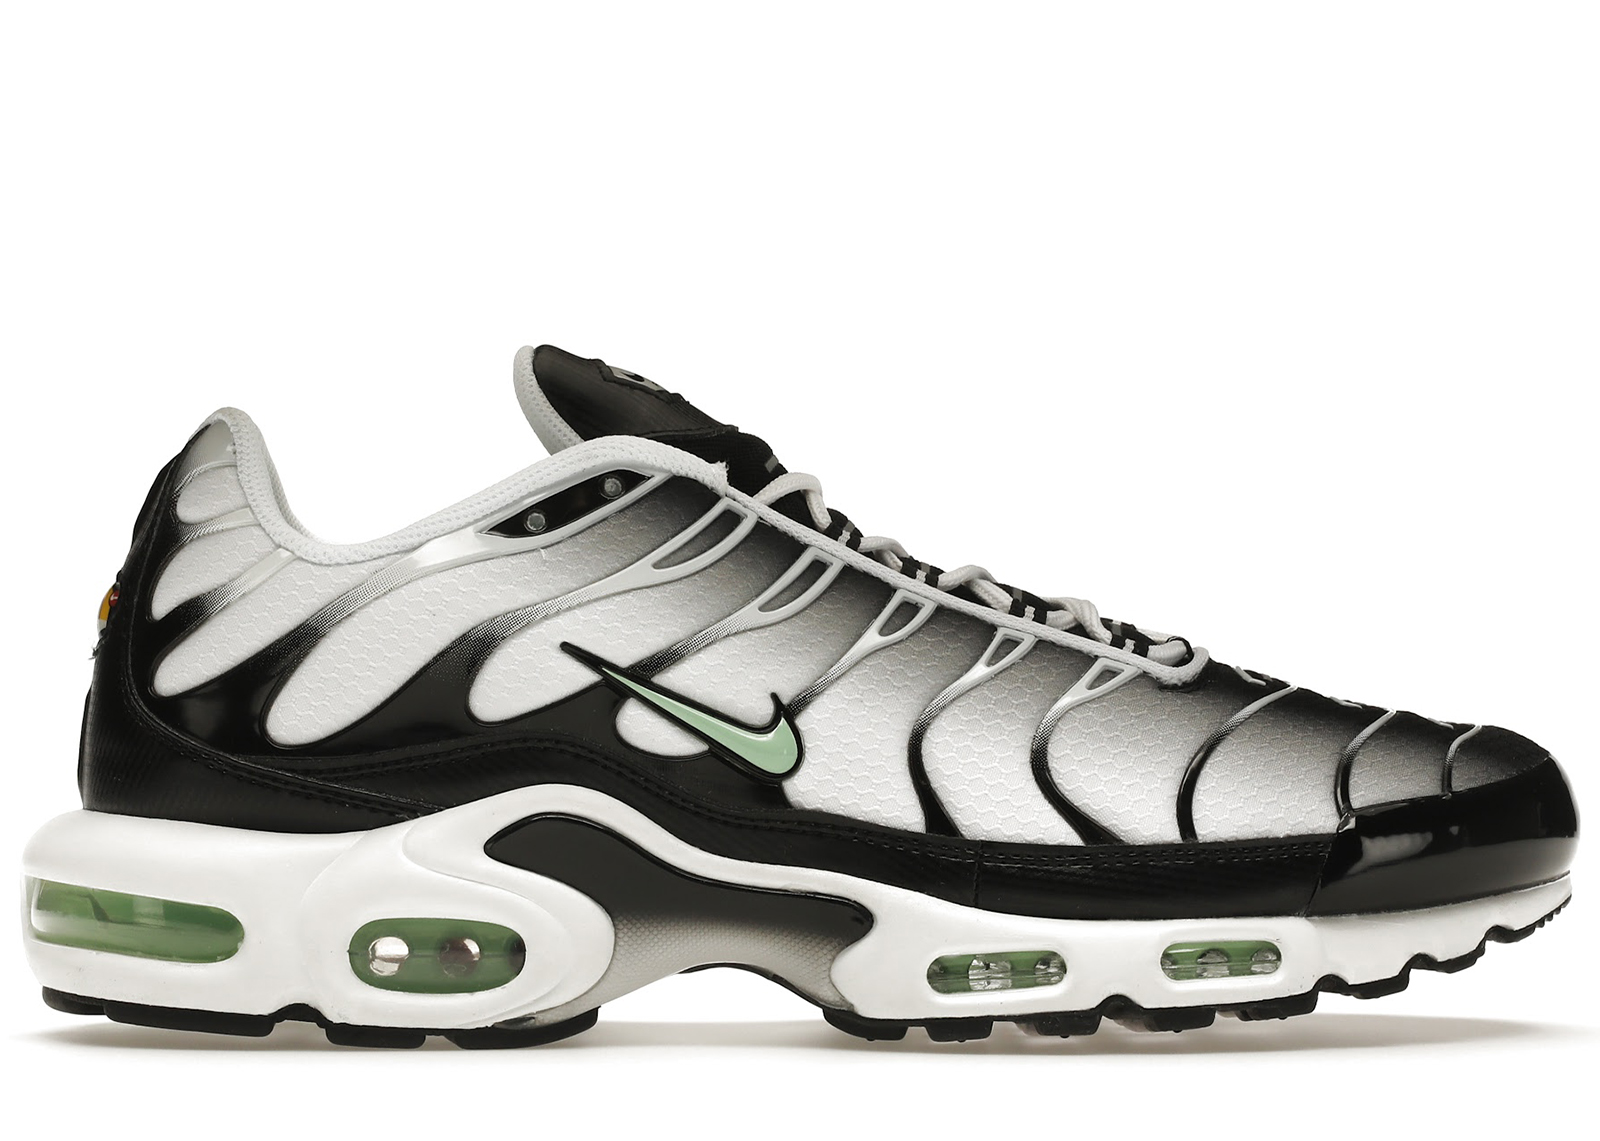 Buy Nike Air Max Plus Shoes & Deadstock Sneakers ابريق بالانجليزي